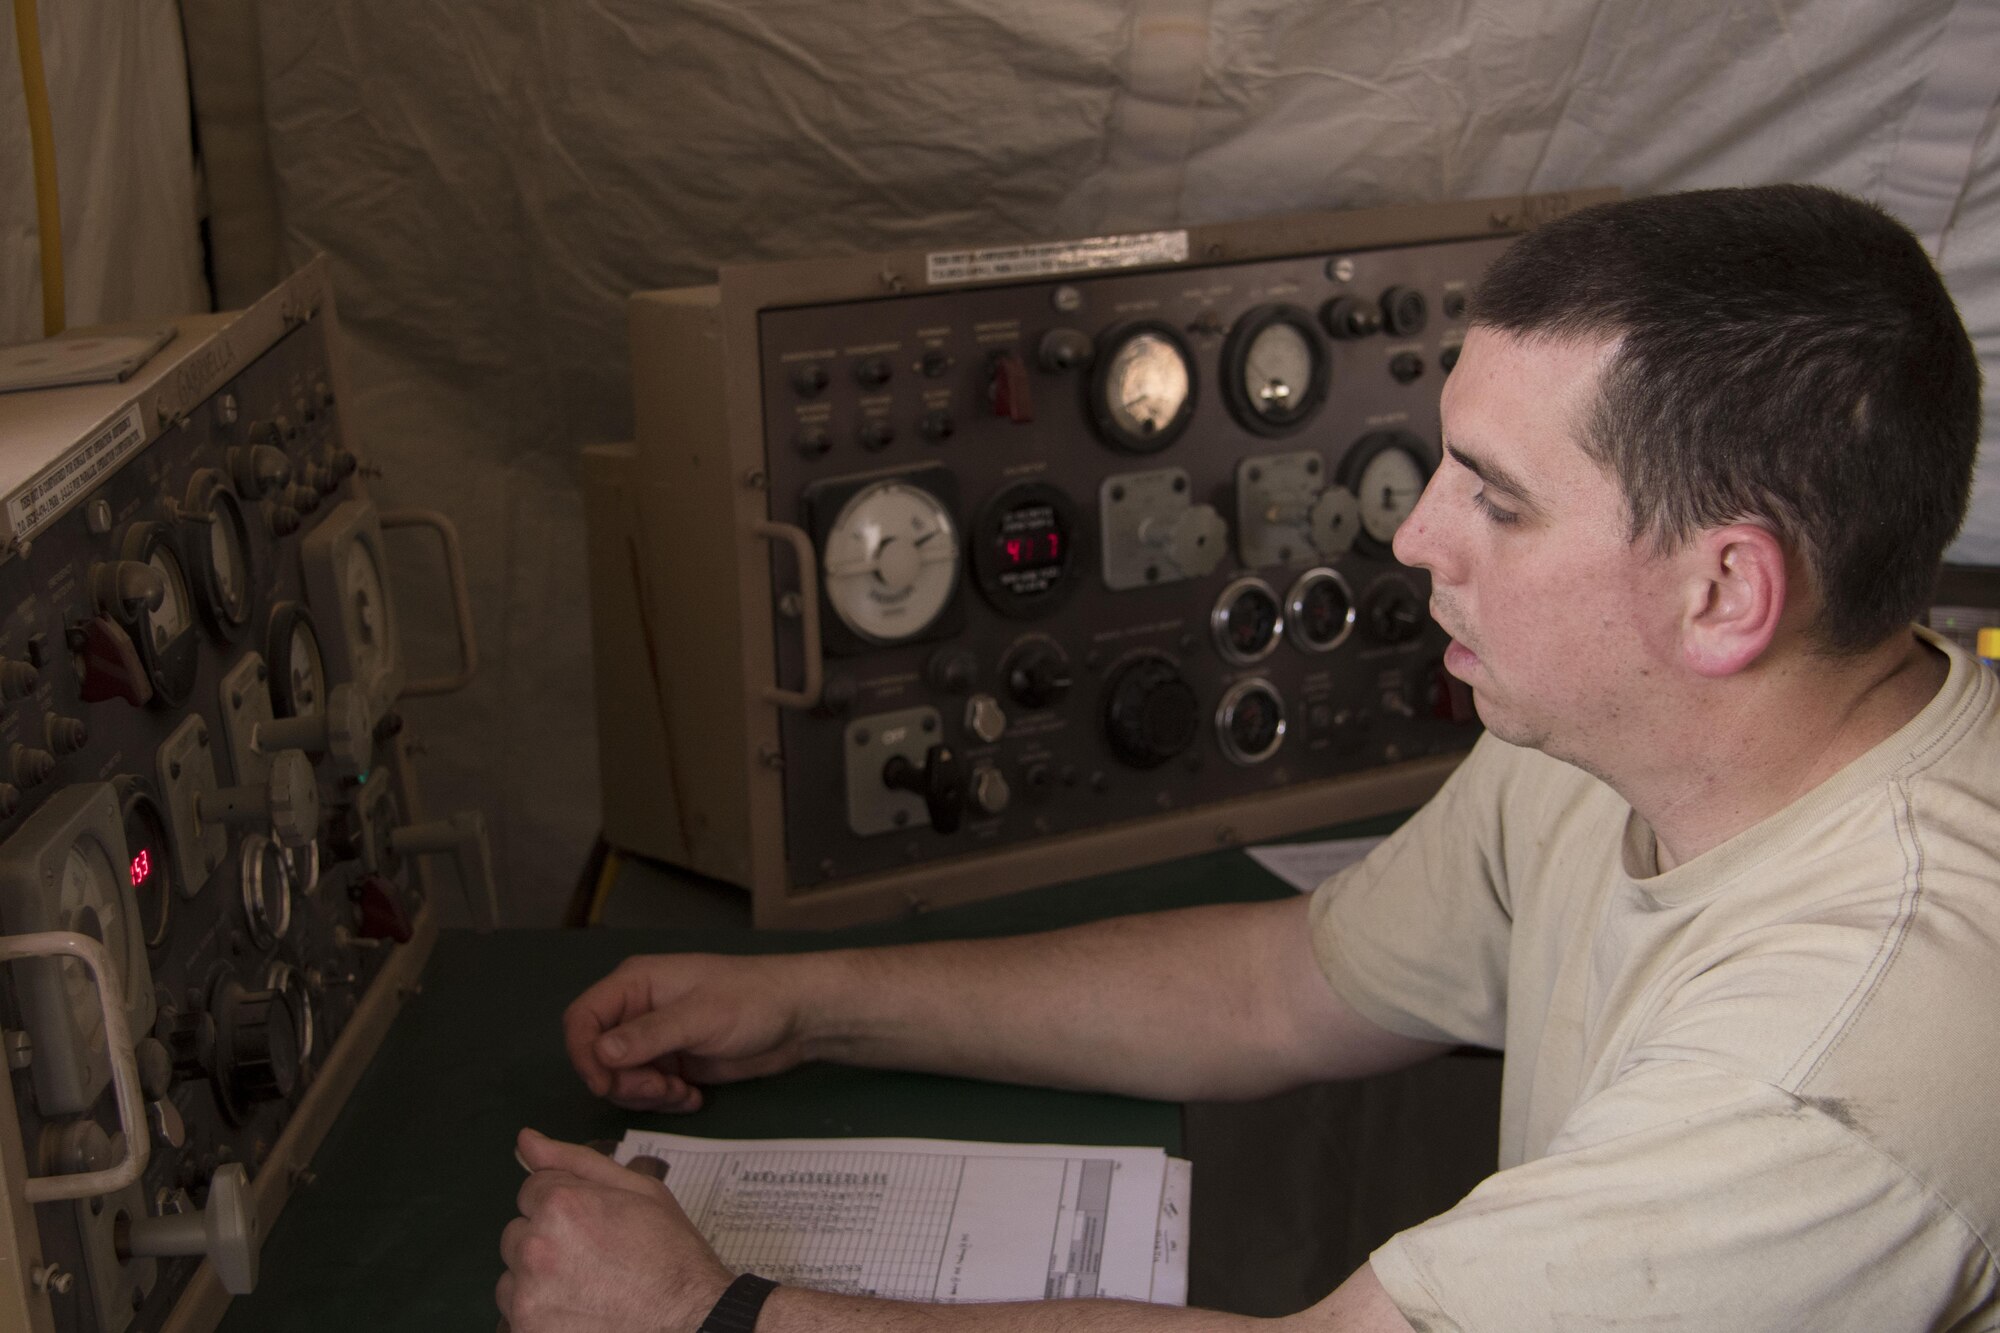 Staff Sgt. Abraham Wanner, a 370th Air Expeditionary Advisory Group Detachment 1 power production craftsman, monitors gauges while starting up a generator at Al Asad Air Base, Iraq Jan. 8, 2017. The power production team’s primary mission at Al Asad is to provide power to the 66th Rescue Squadron, which requires two prime-power generators and approximately ten smaller convenience generators that serve as back-ups in case the prime-power generators fail. (U.S. Air Force photo/Senior Airman Andrew Park)